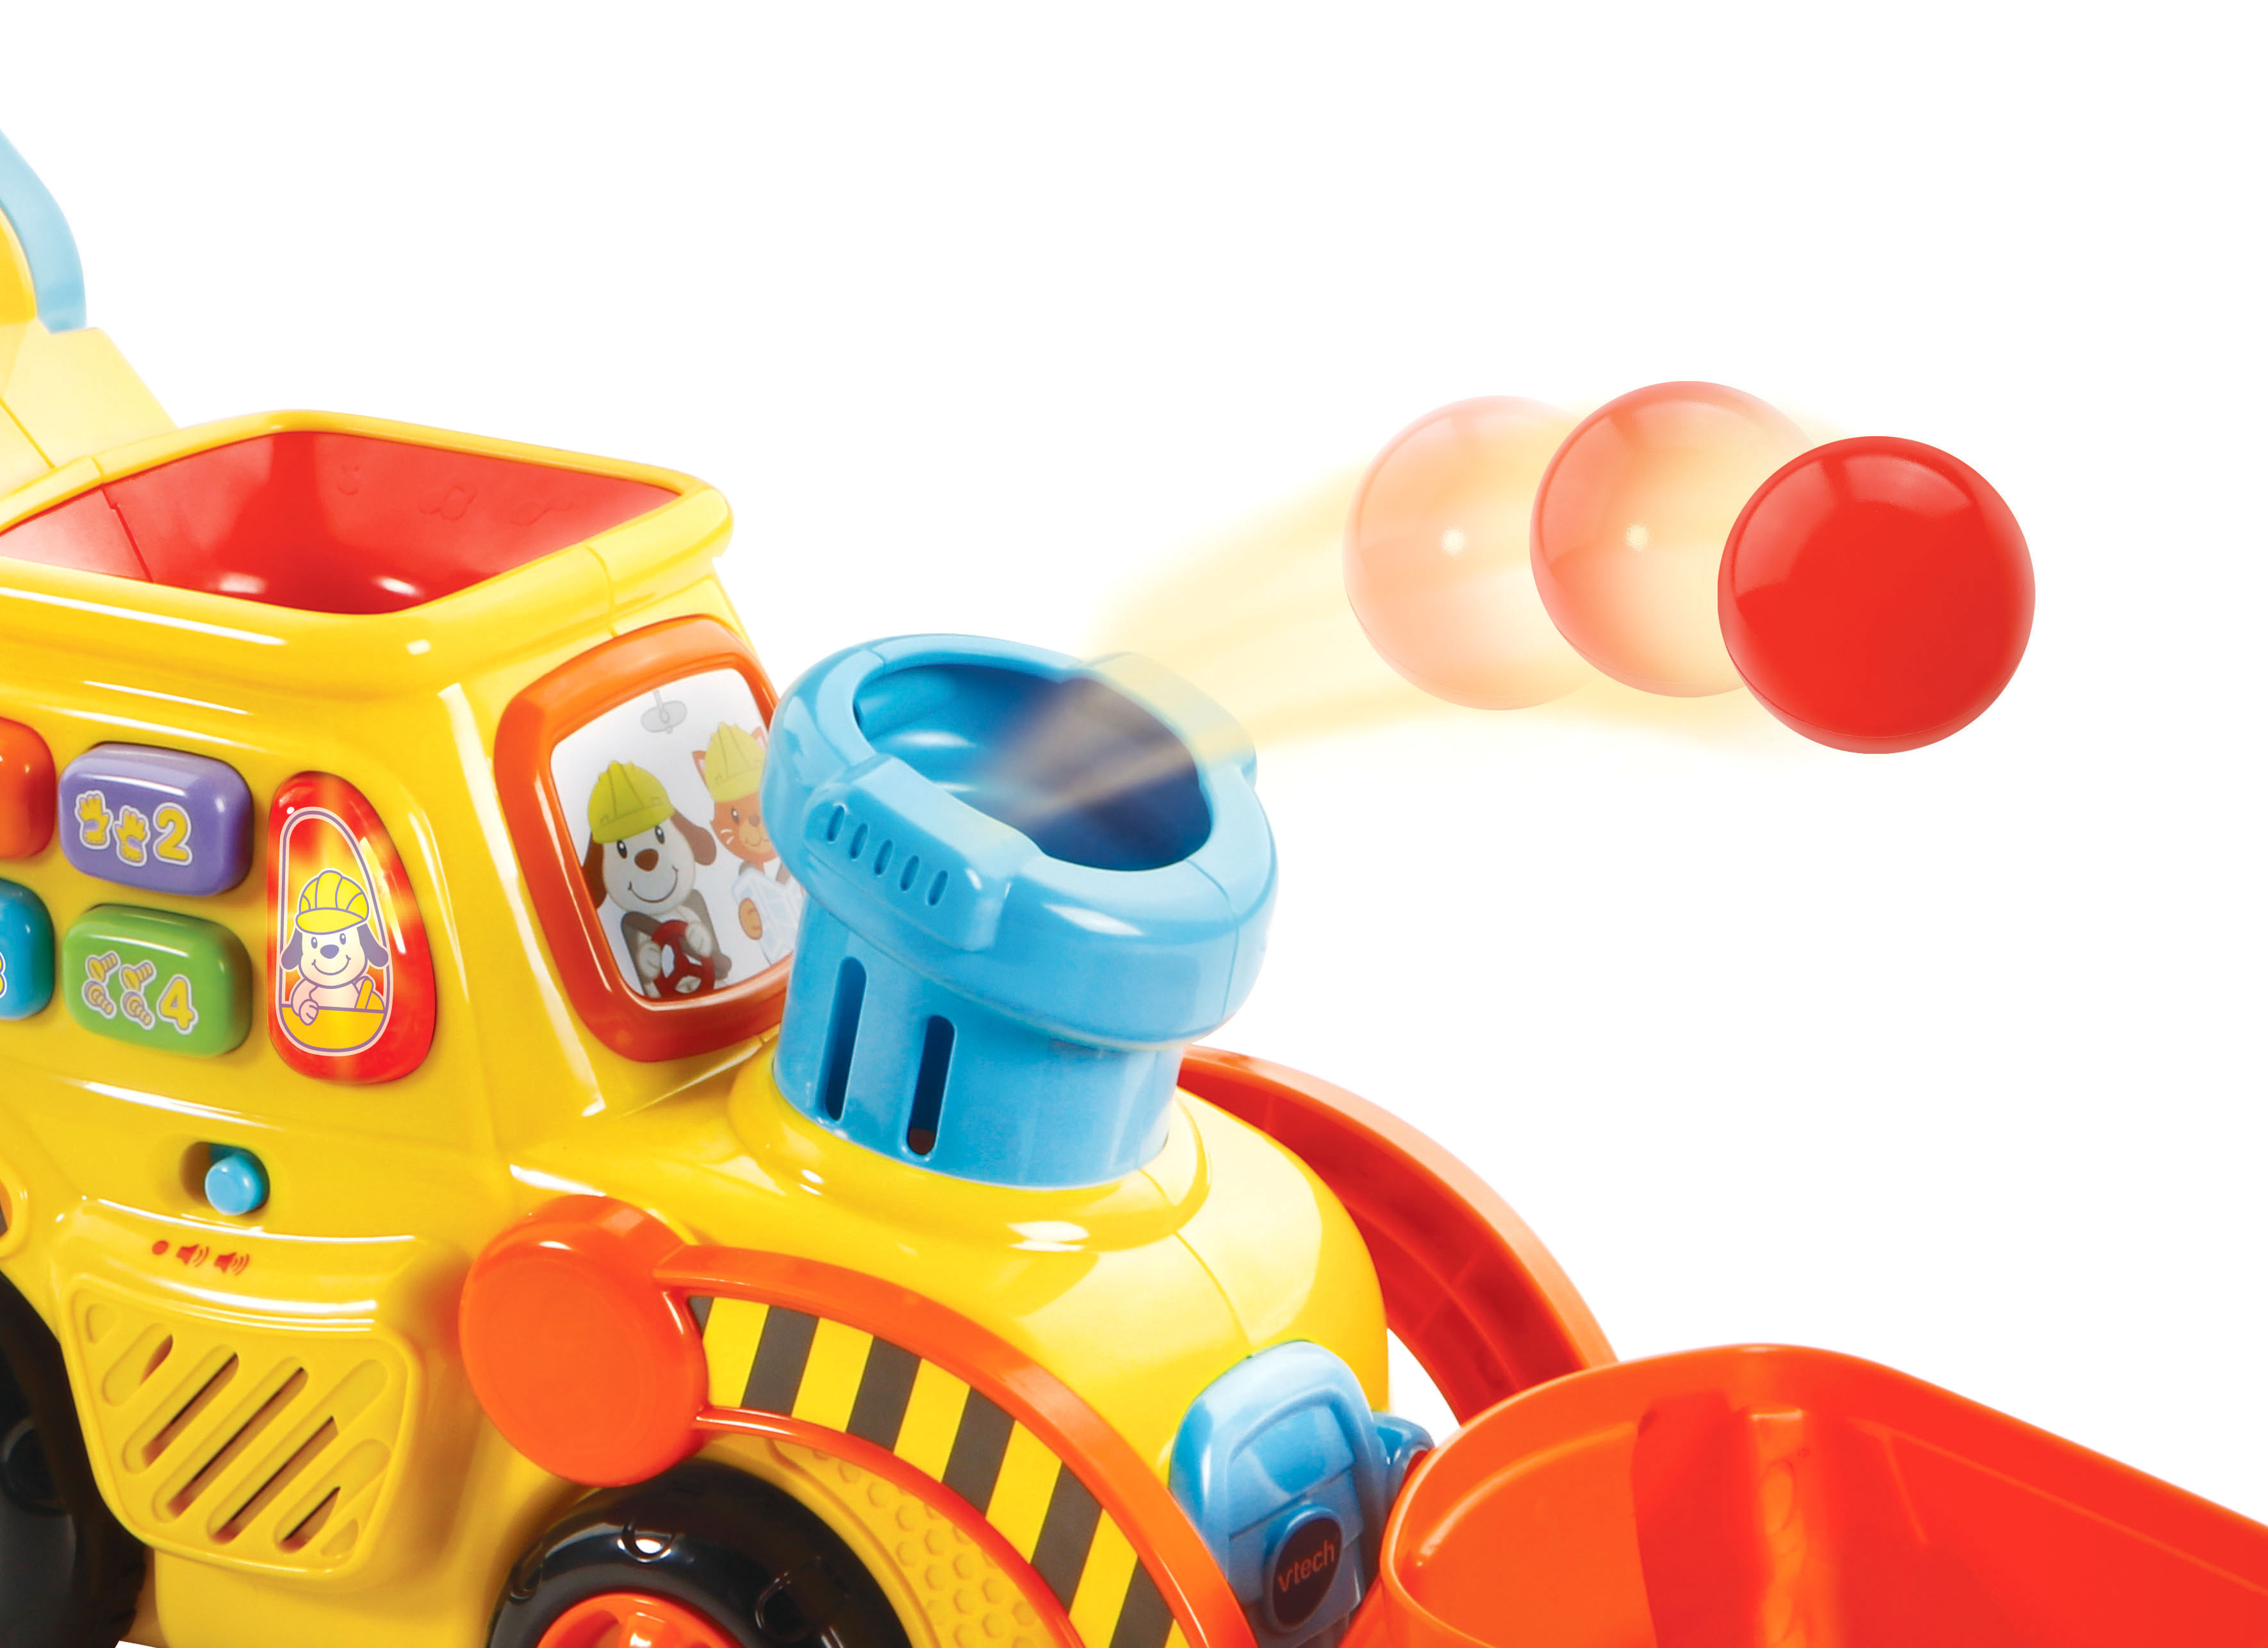 VTech, Pop-a-Balls, Push and Pop Bulldozer, Toddler Learning Toy - image 8 of 12